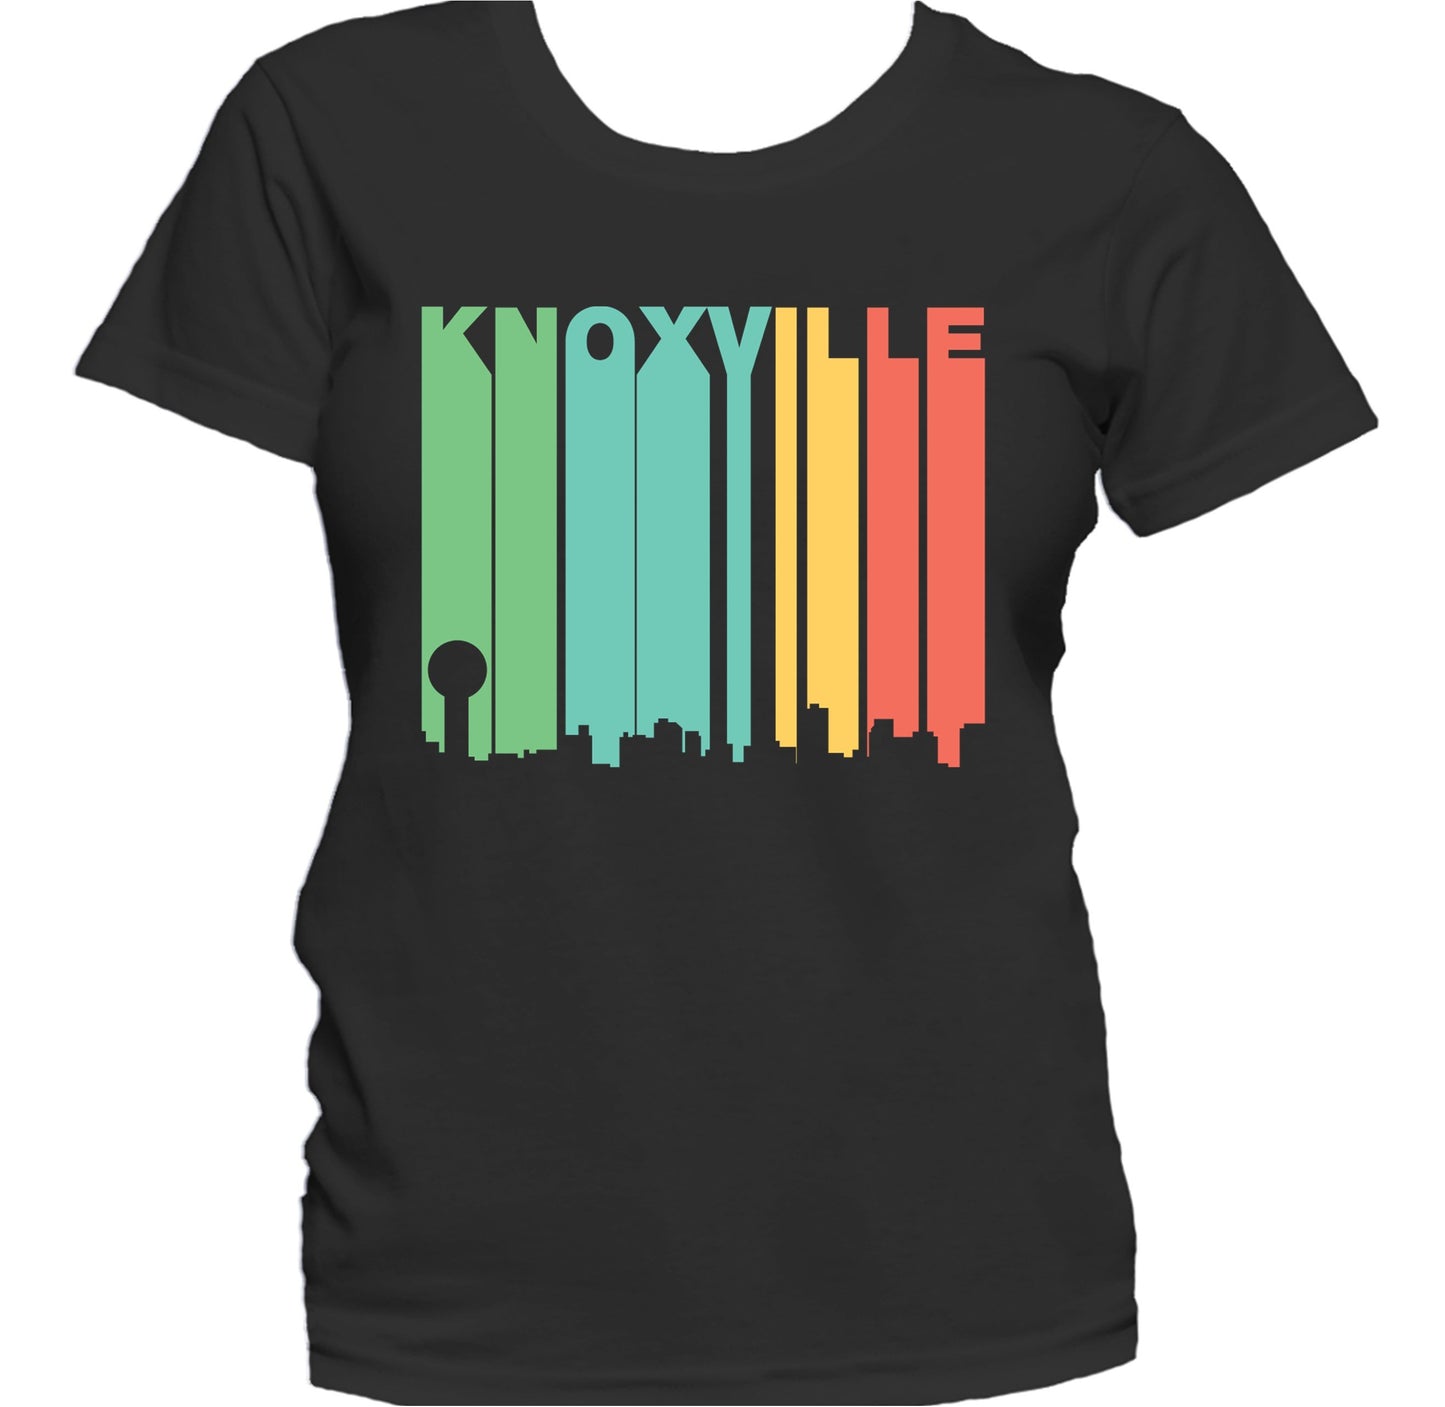 Retro 1970's Style Knoxville Tennessee Skyline Women's T-Shirt